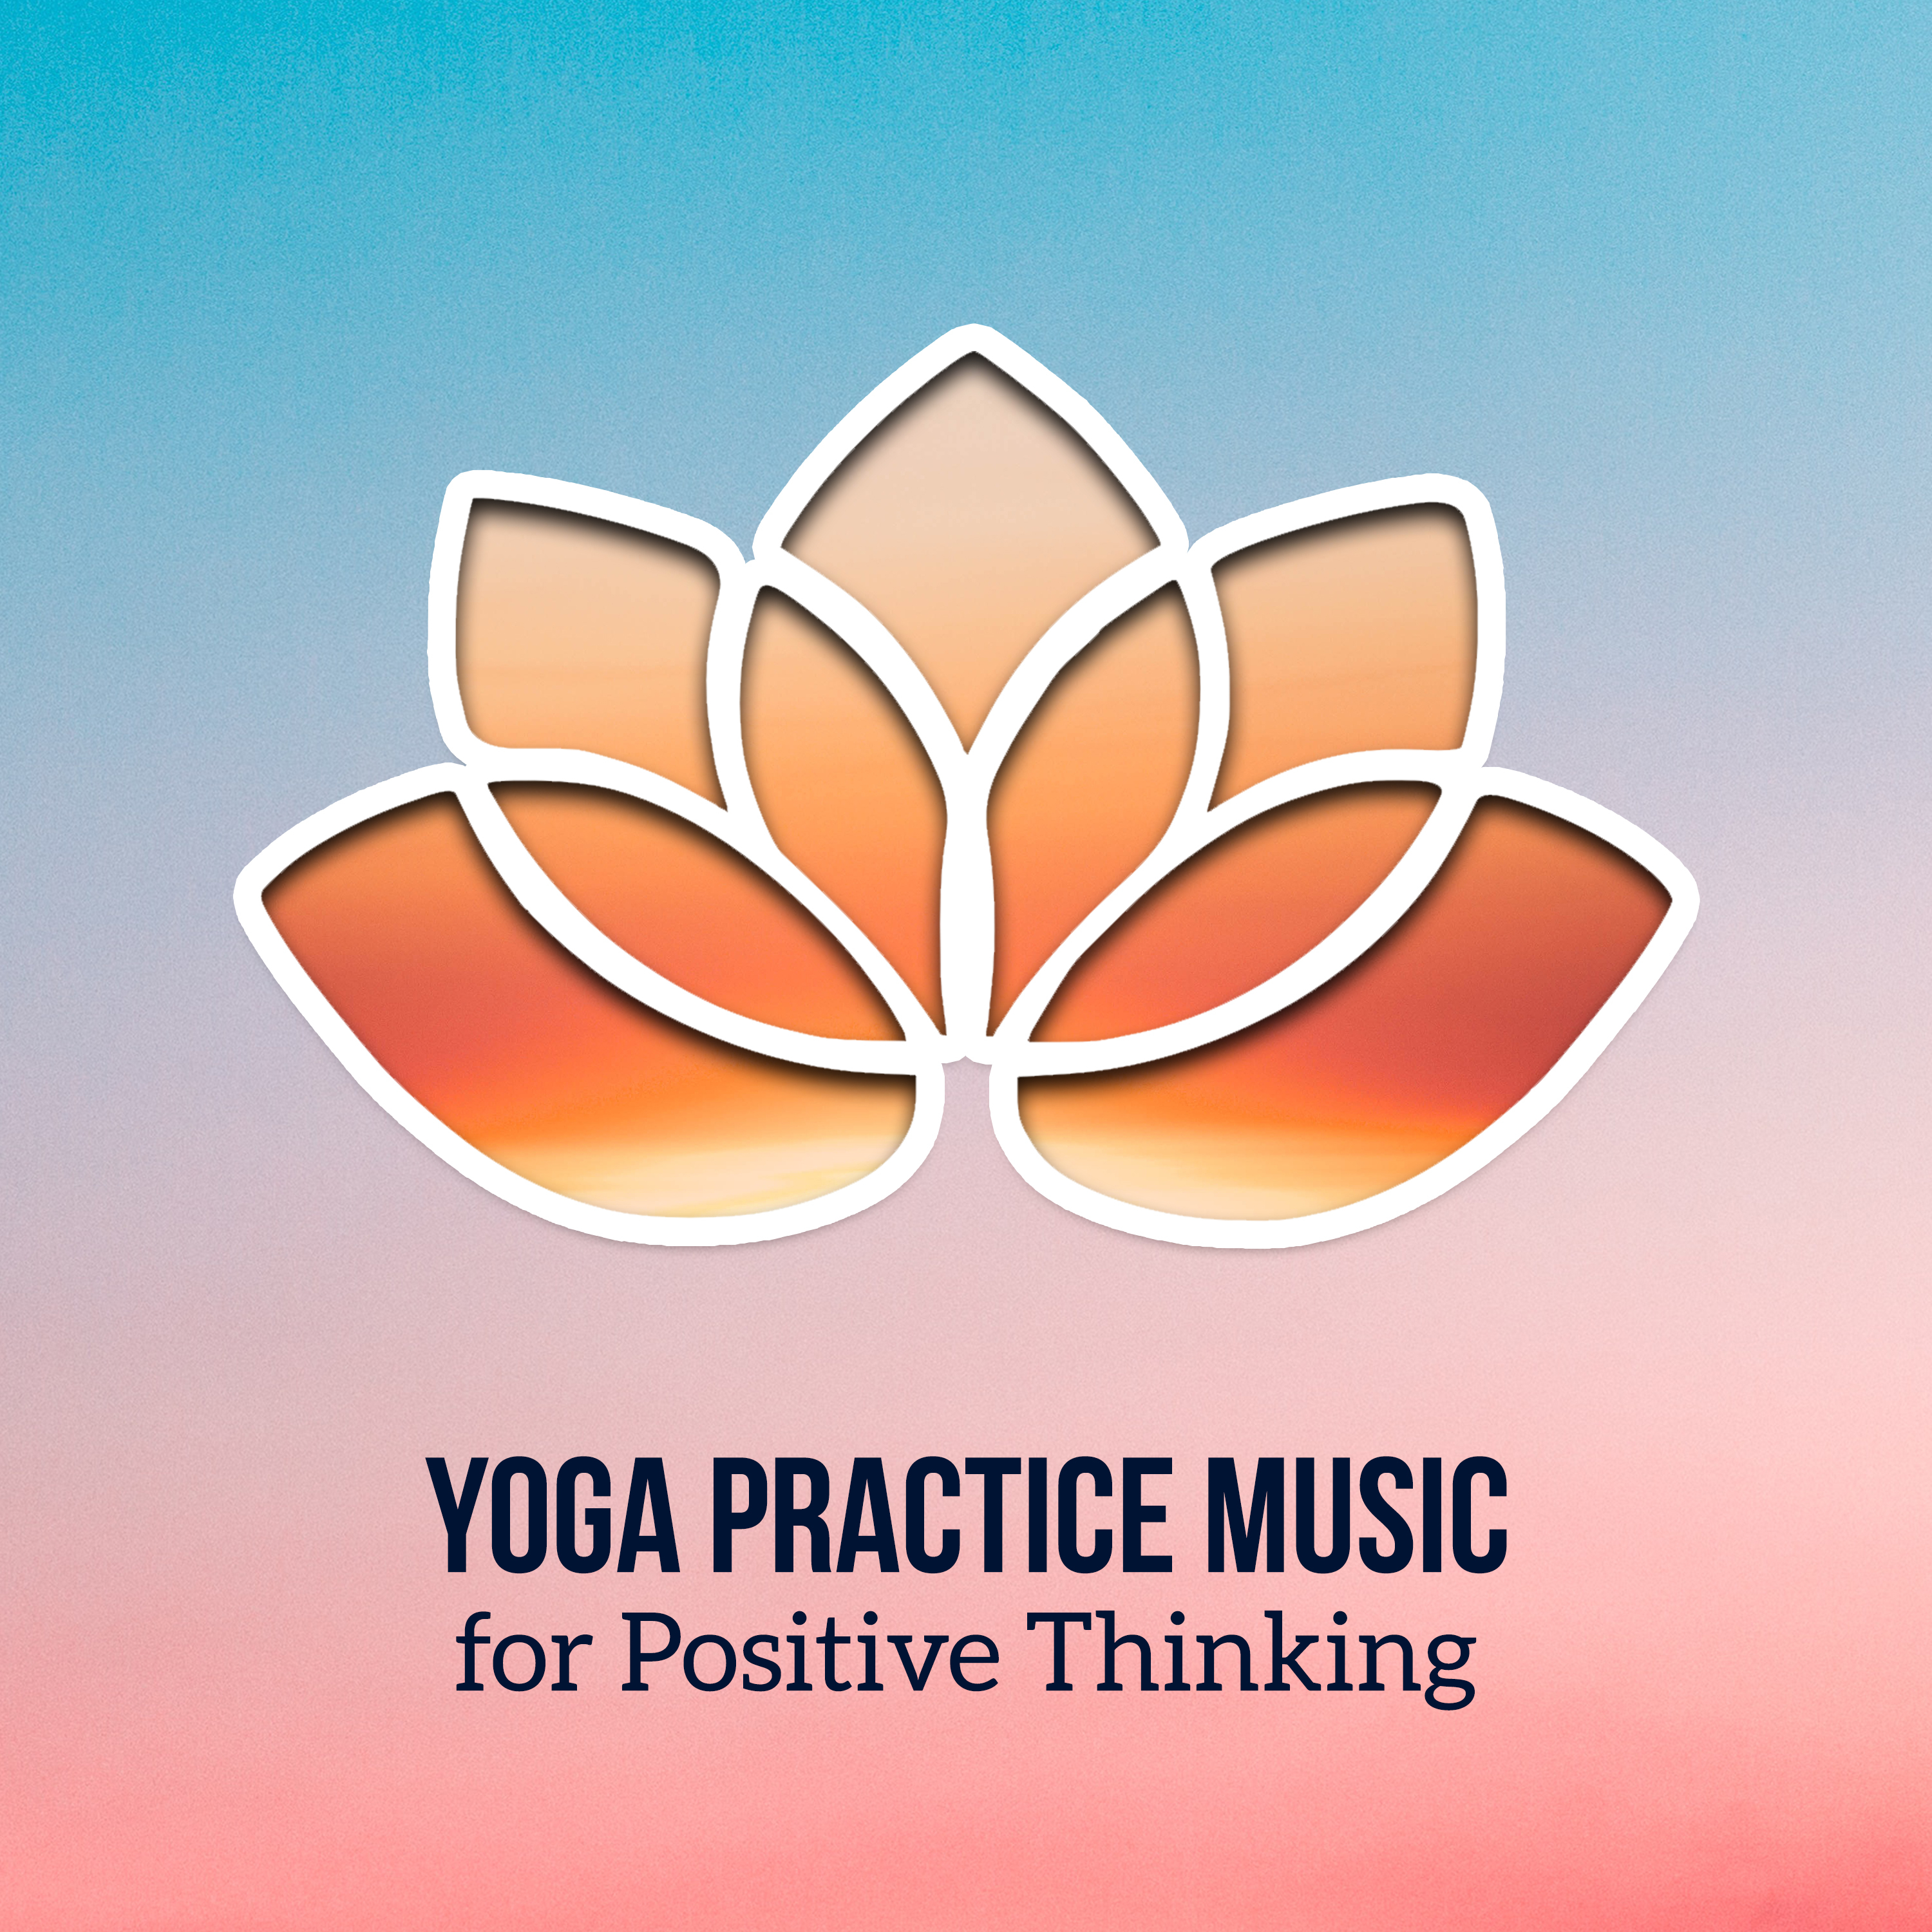 Yoga Practice Music for Positive Thinking